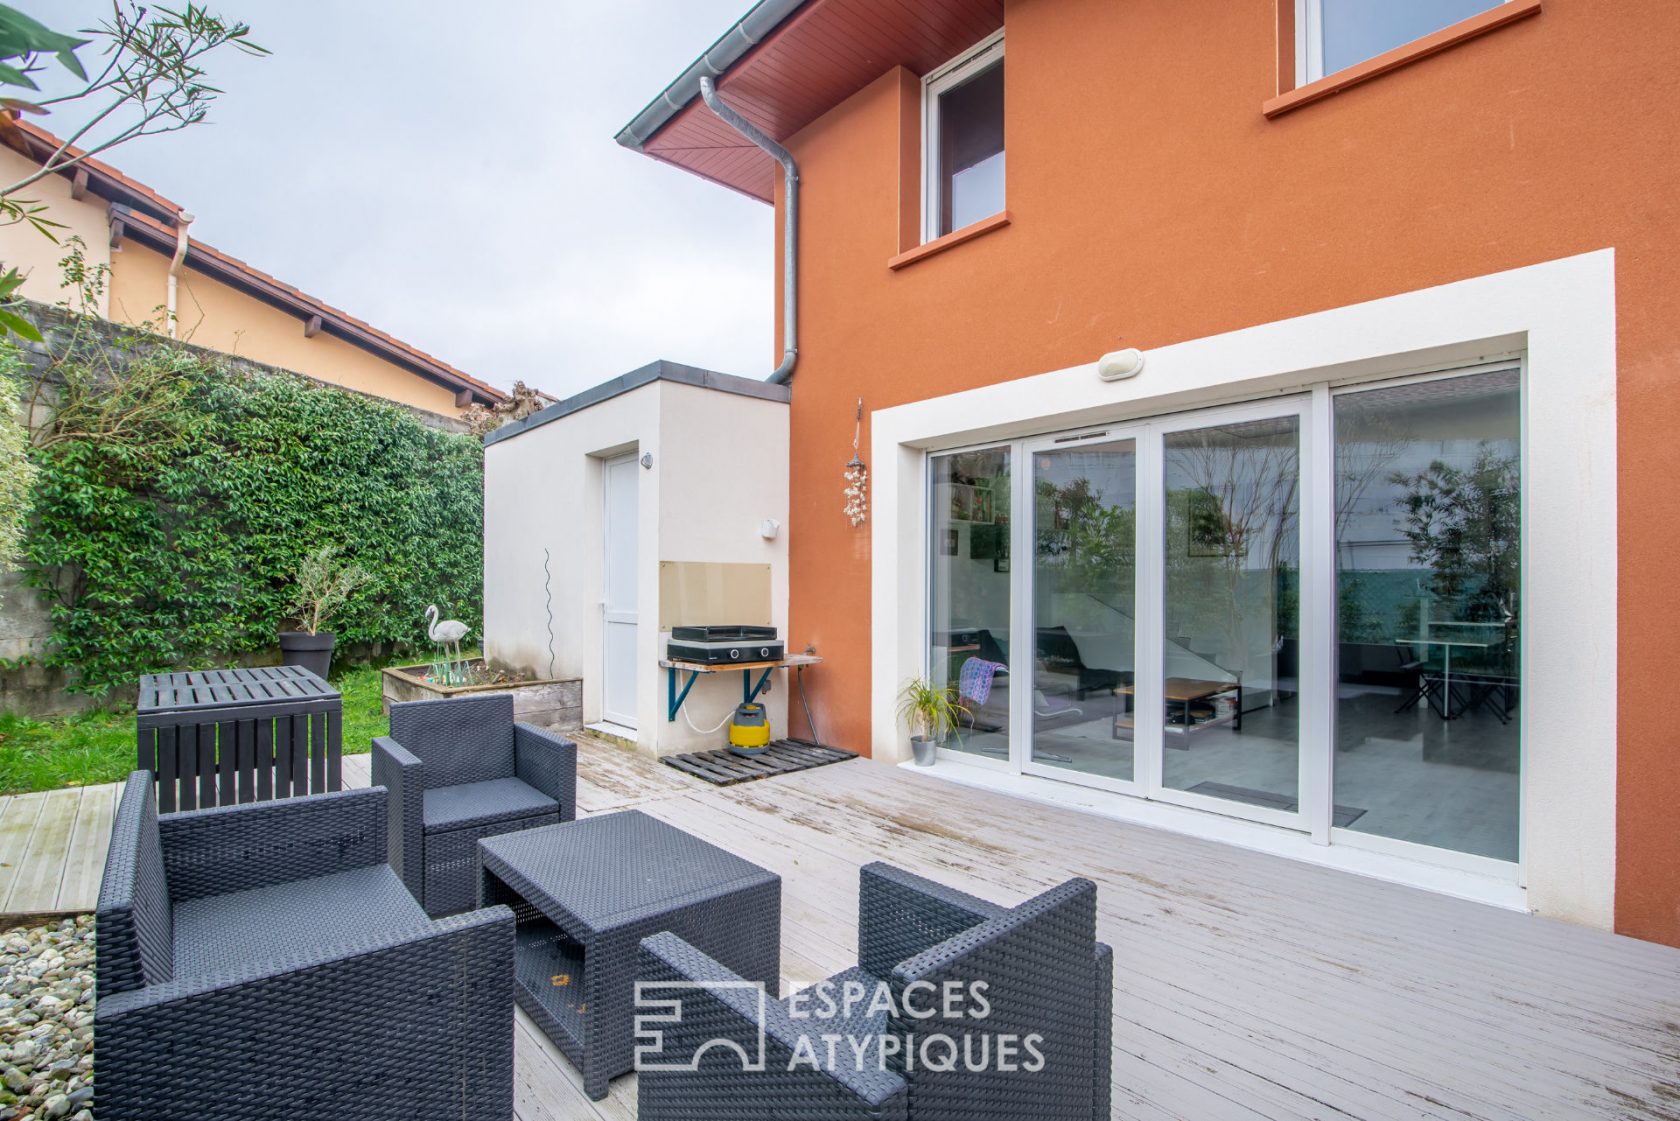 House with intimate garden – Anglet – 86 sqm